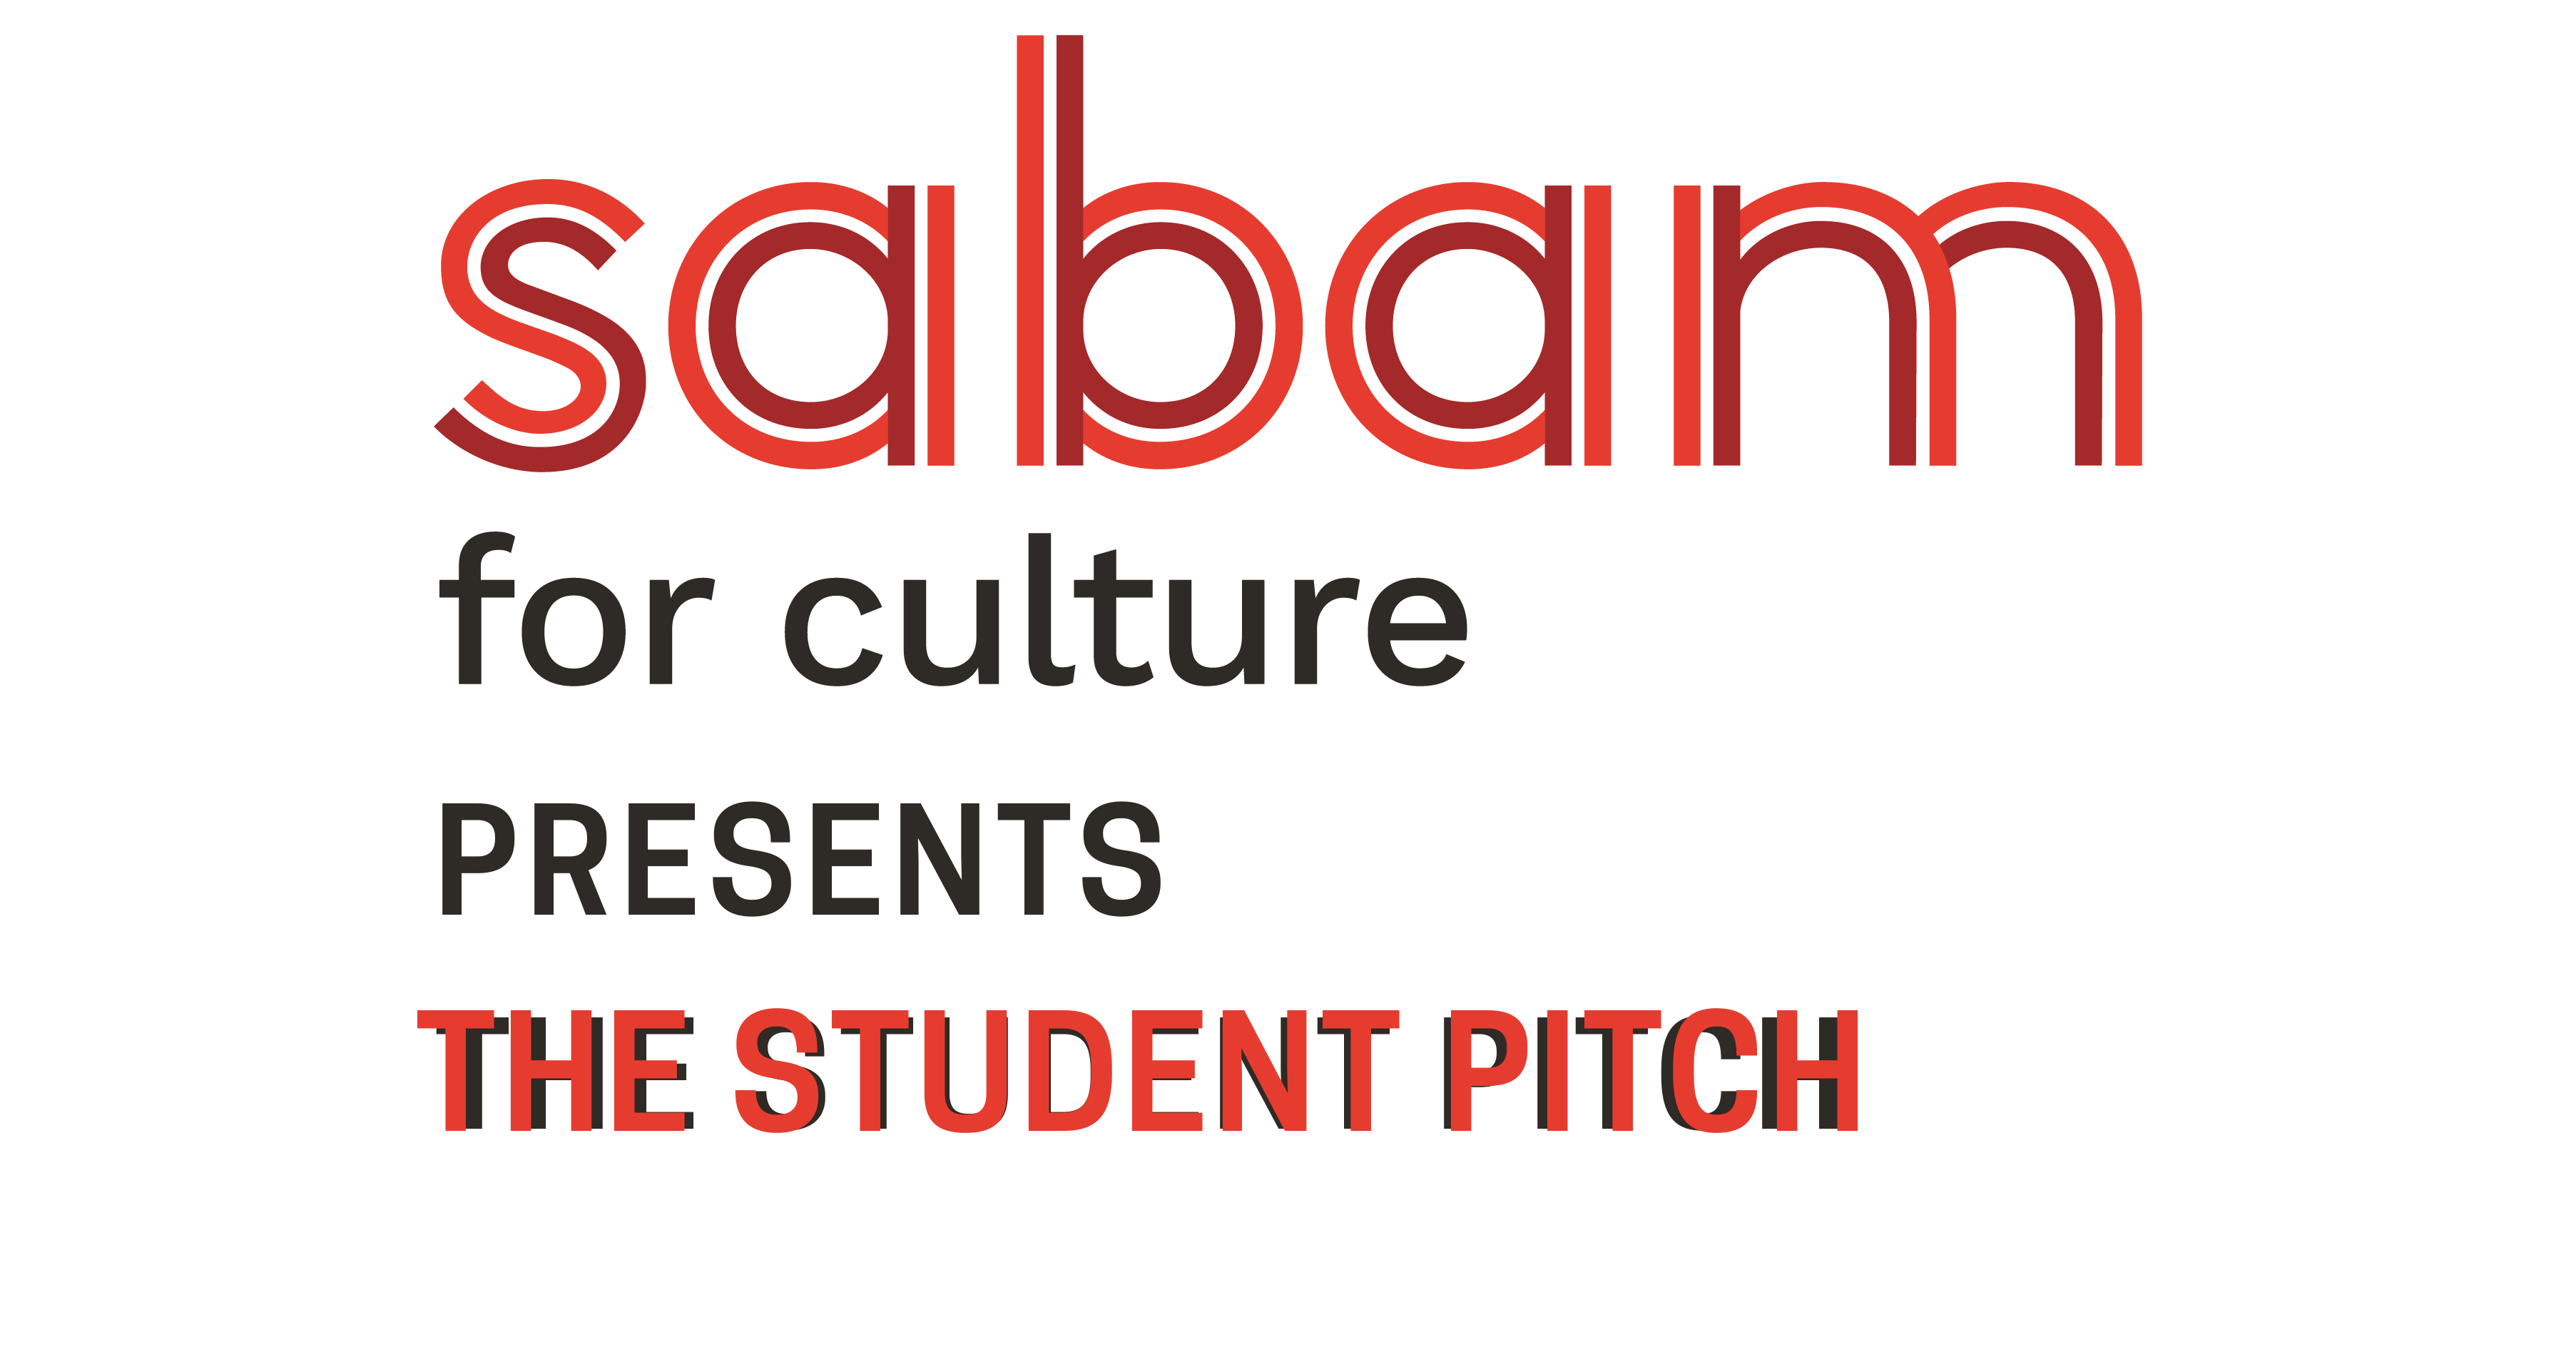 Sabam for culture presents The Student Pitch